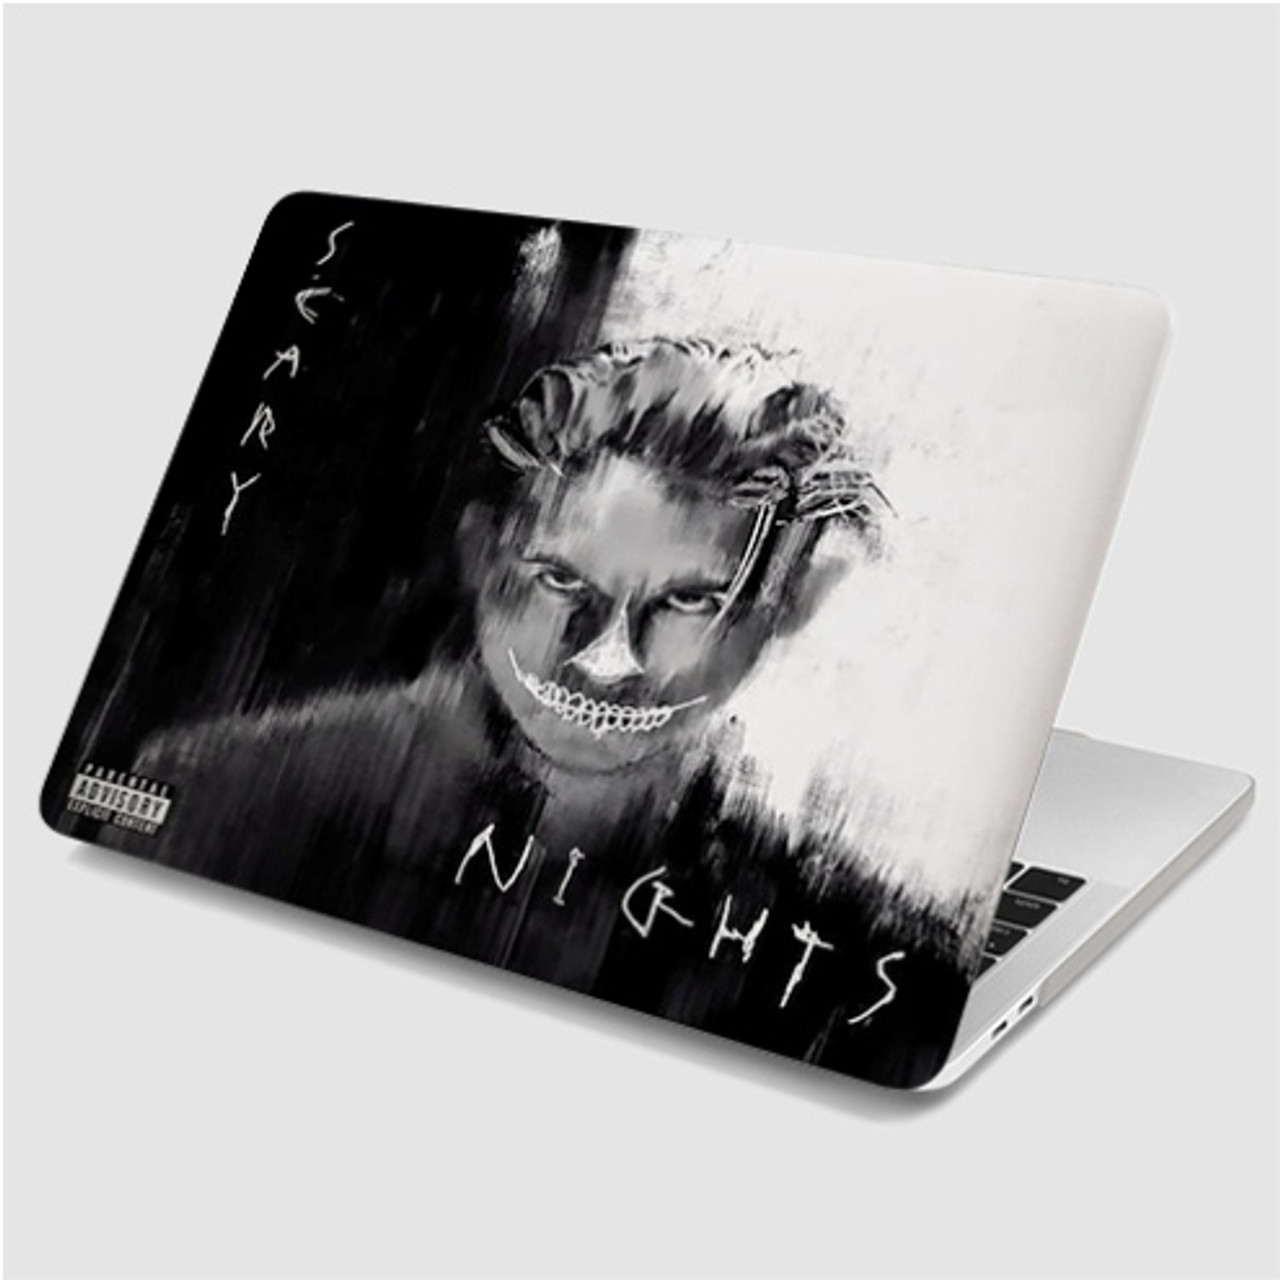 https://cdn11.bigcommerce.com/s-xhmrmcecz5/images/stencil/1280x1280/products/108990/111119/G-Eazy-Scary-Nights-Mackbook-Case__98441.1649489988.jpg?c=1